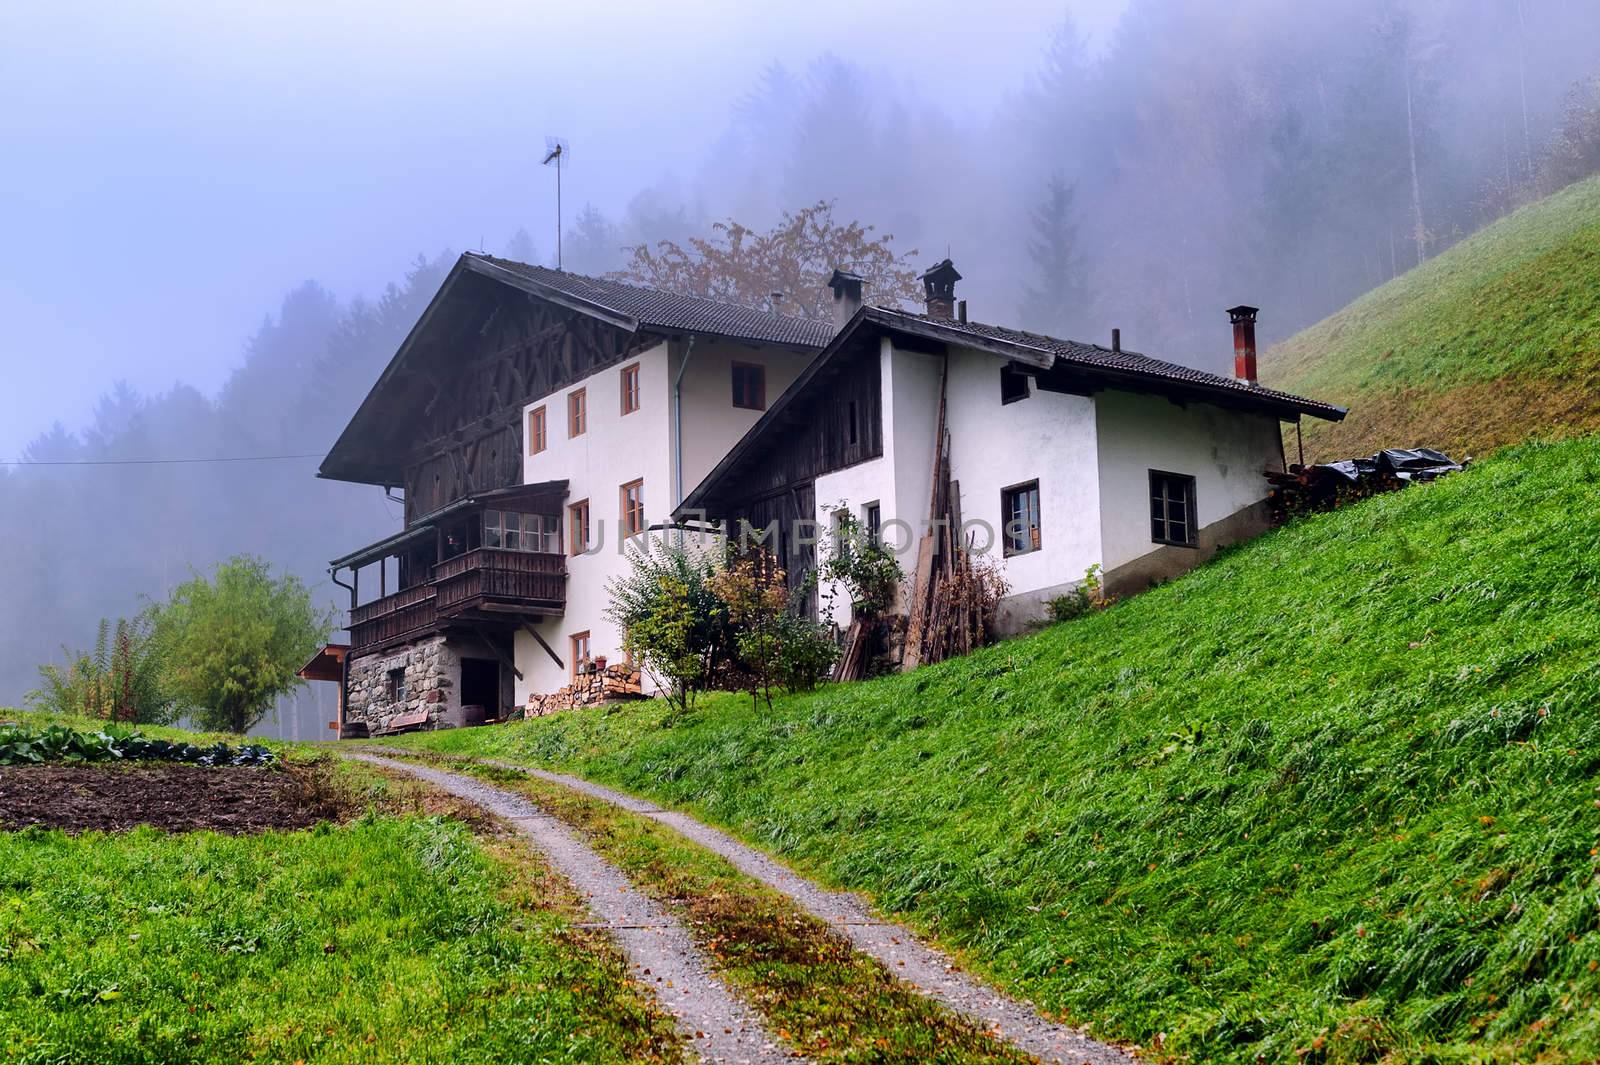 Traditional wooden house in Tyrol, Austria